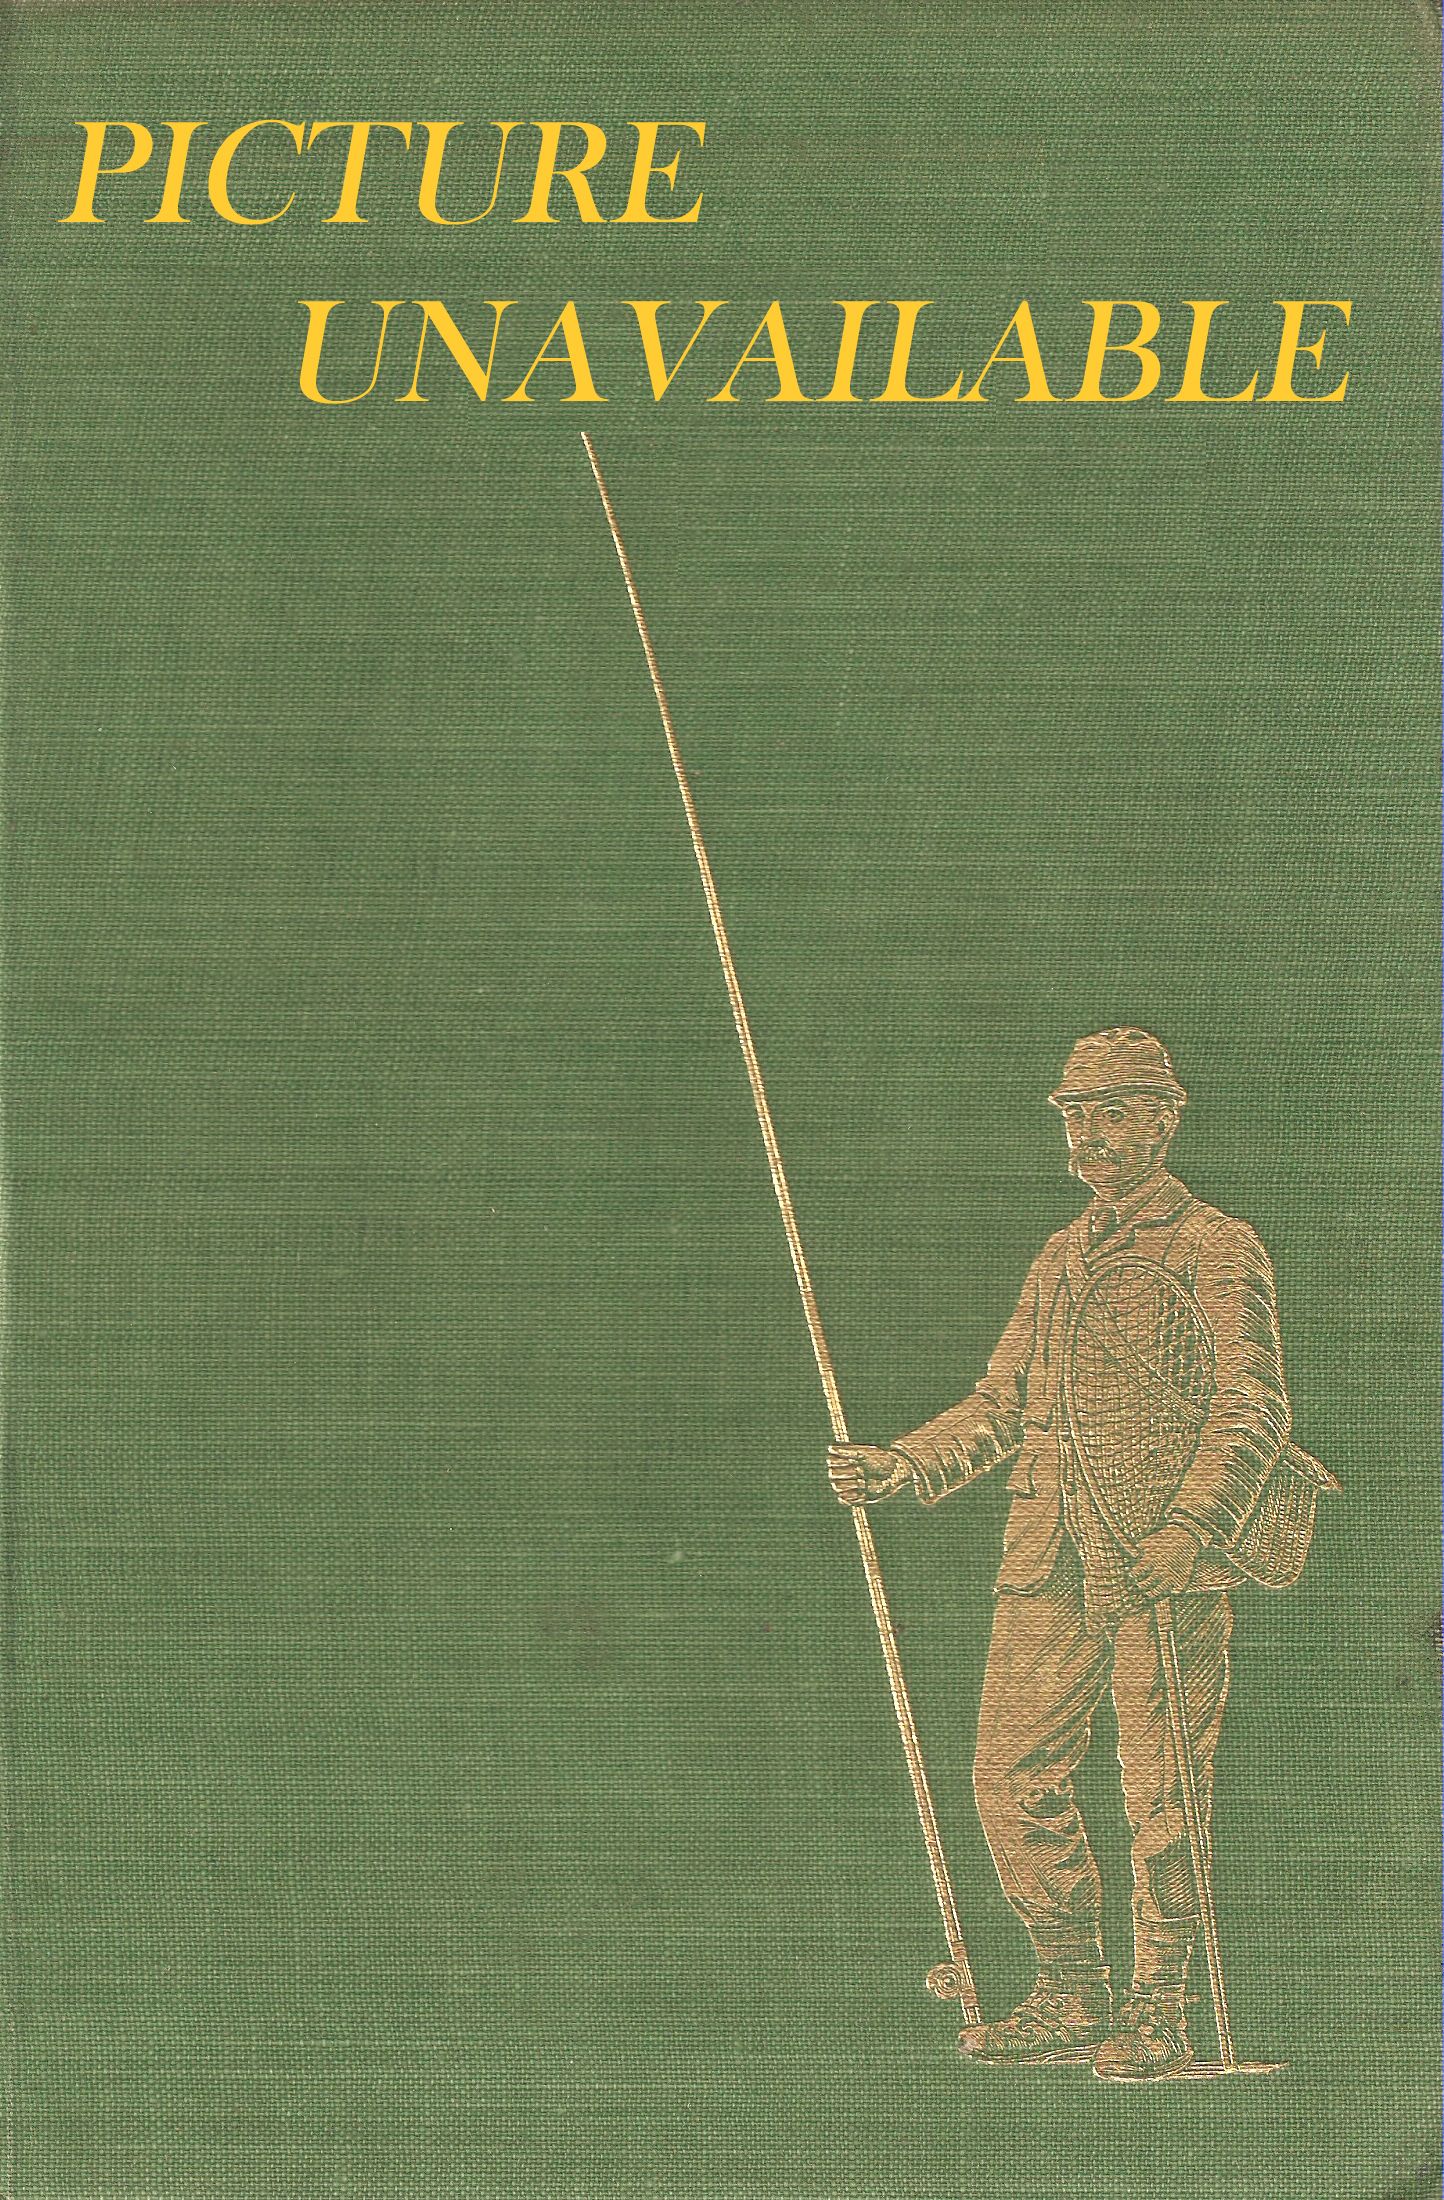 BRITISH ANGLING BIBLIOGRAPHIES: An Essay and a Guide to Resources. By Ken  Callahan. Angling Monographs Series Volume Nine. De Luxe Edition.